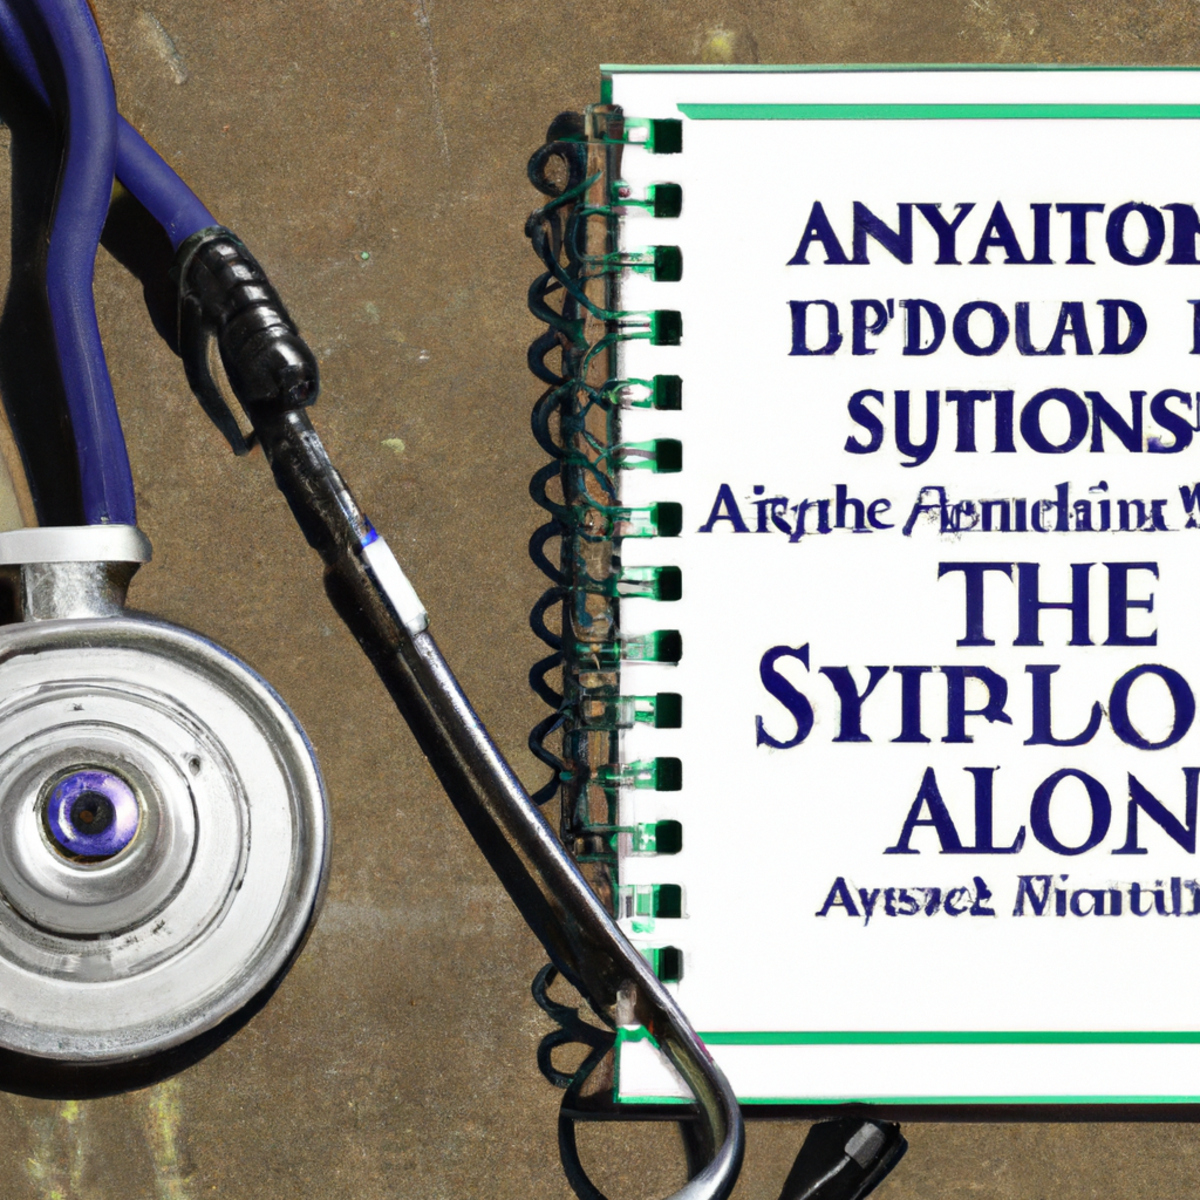 Stethoscope on textbook and running shoes on track symbolize strength and resilience in living with Alport Syndrome.